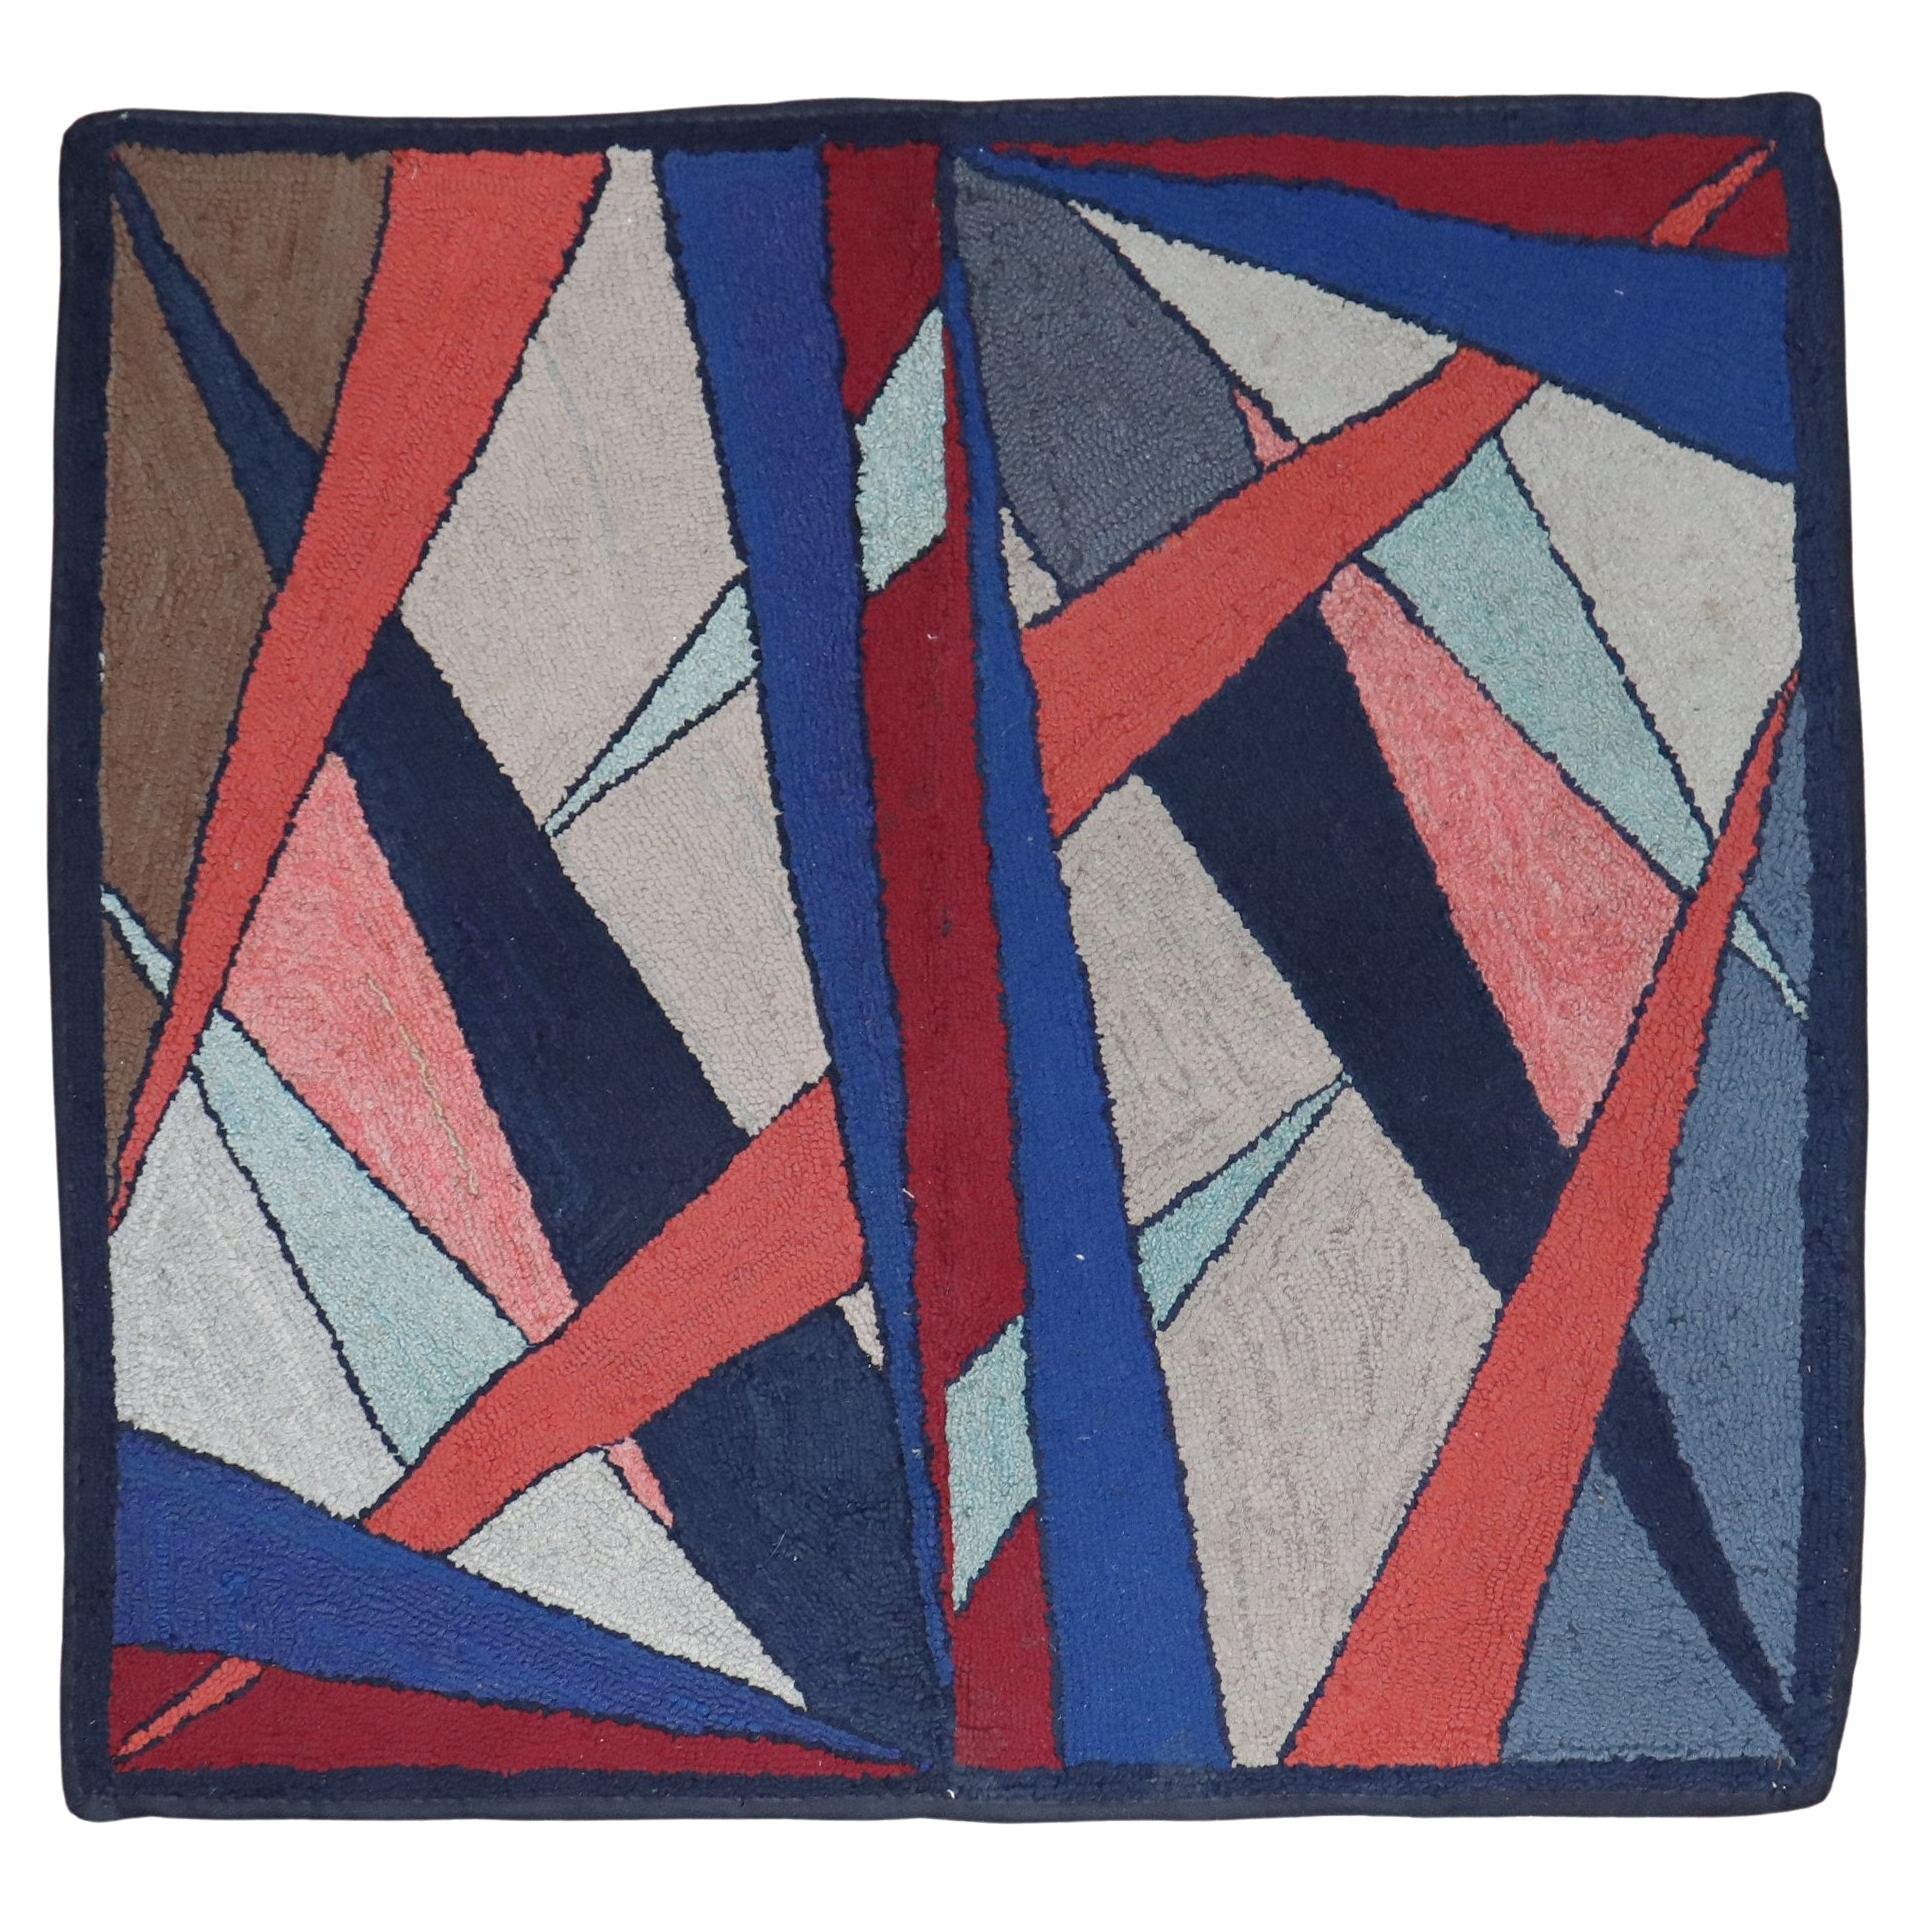 Zabihi Collection Abstract American Hooked Scatter Square Rug